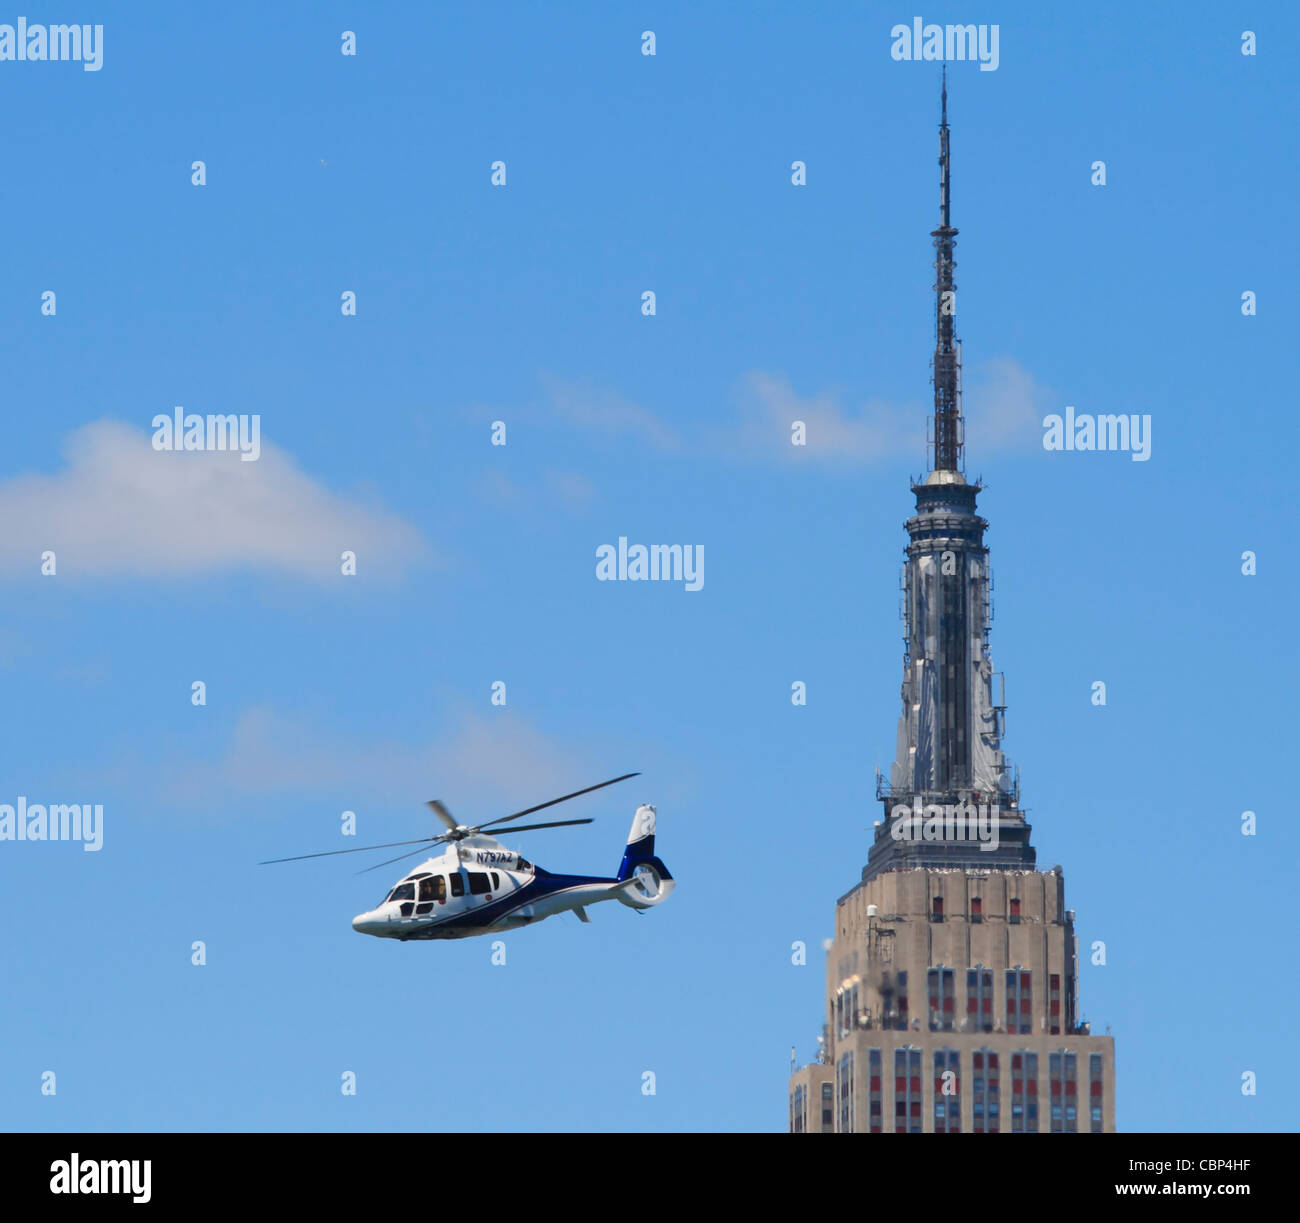 Eurocopter EC 155 B1, number N797AZ, flying past the Empire State Building in New York. Stock Photo